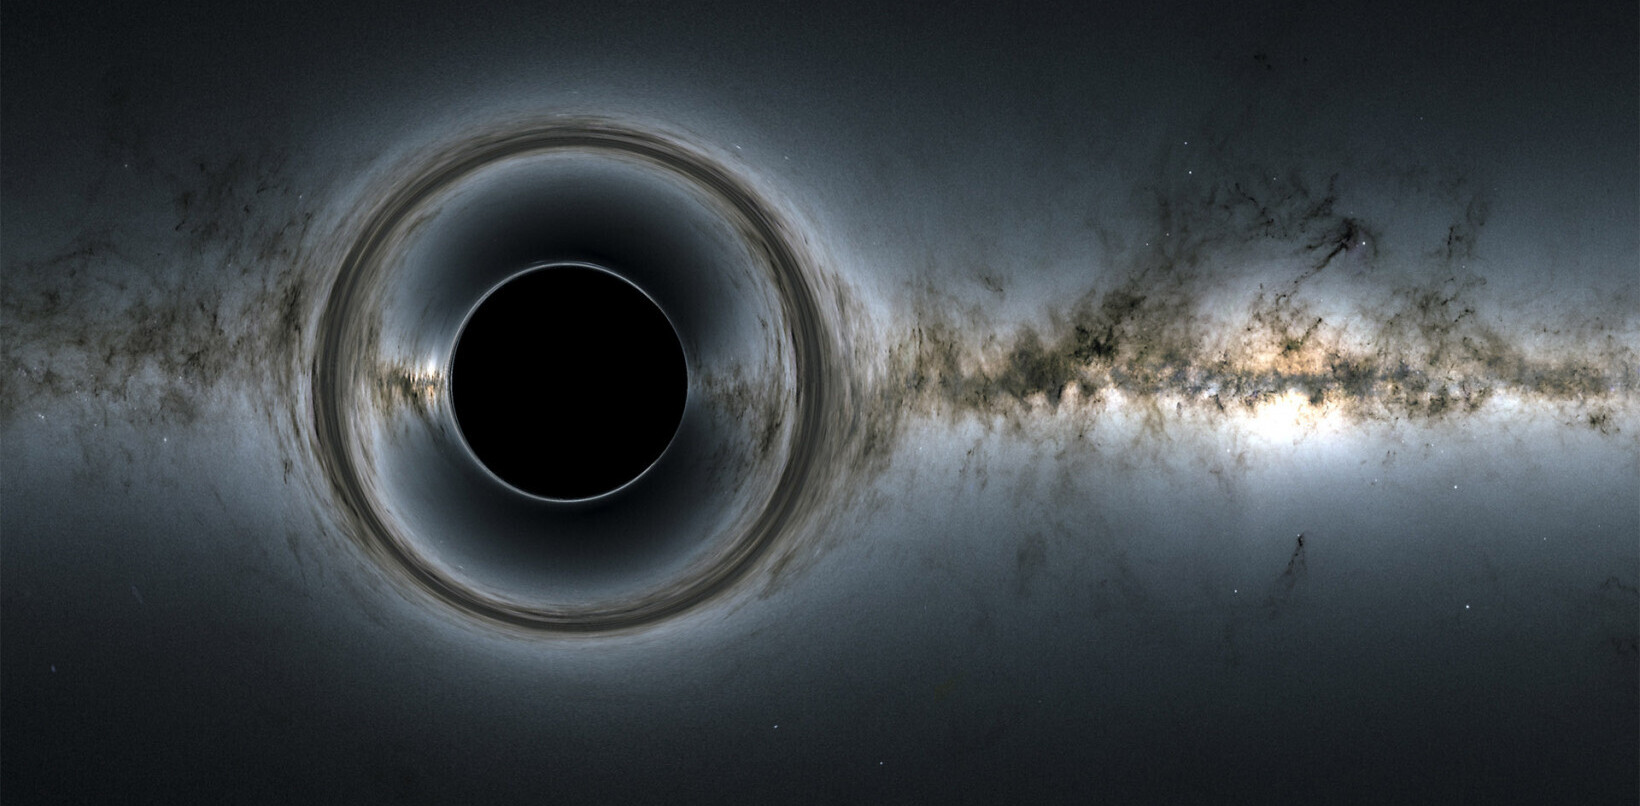 Can black holes become white holes?